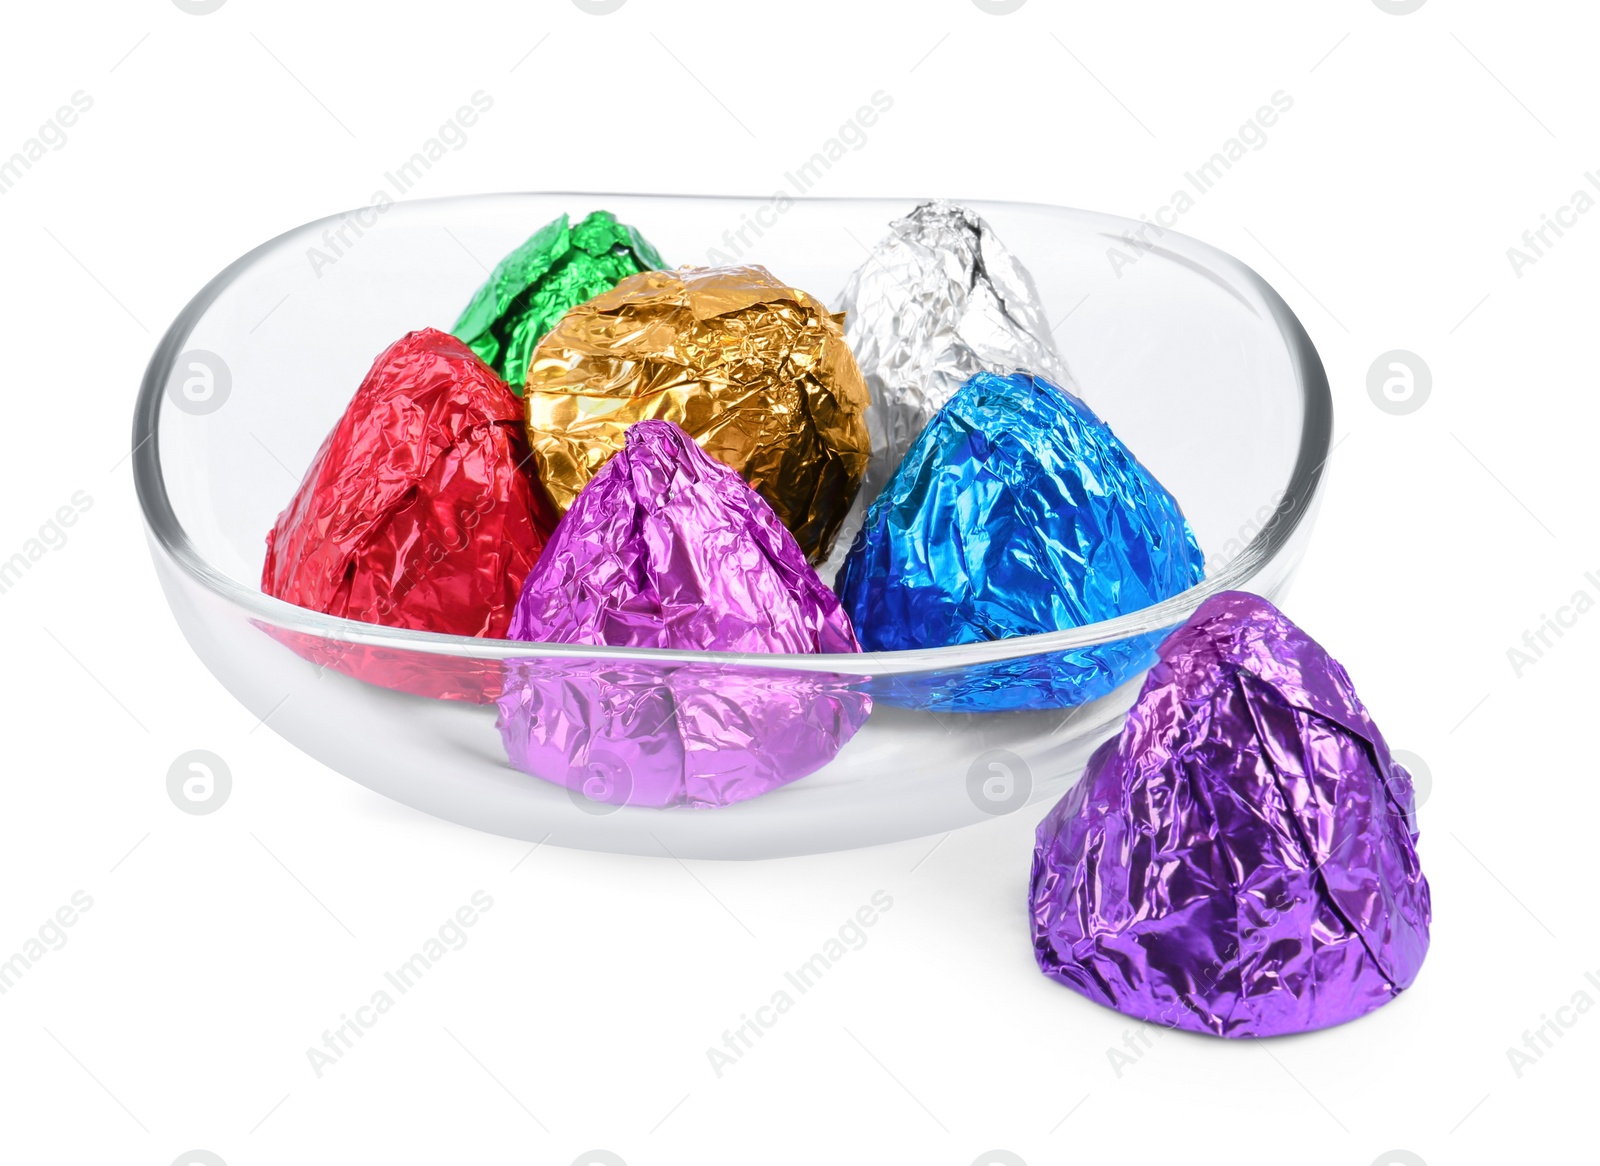 Photo of Bowl with many tasty candies in colorful wrappers isolated on white